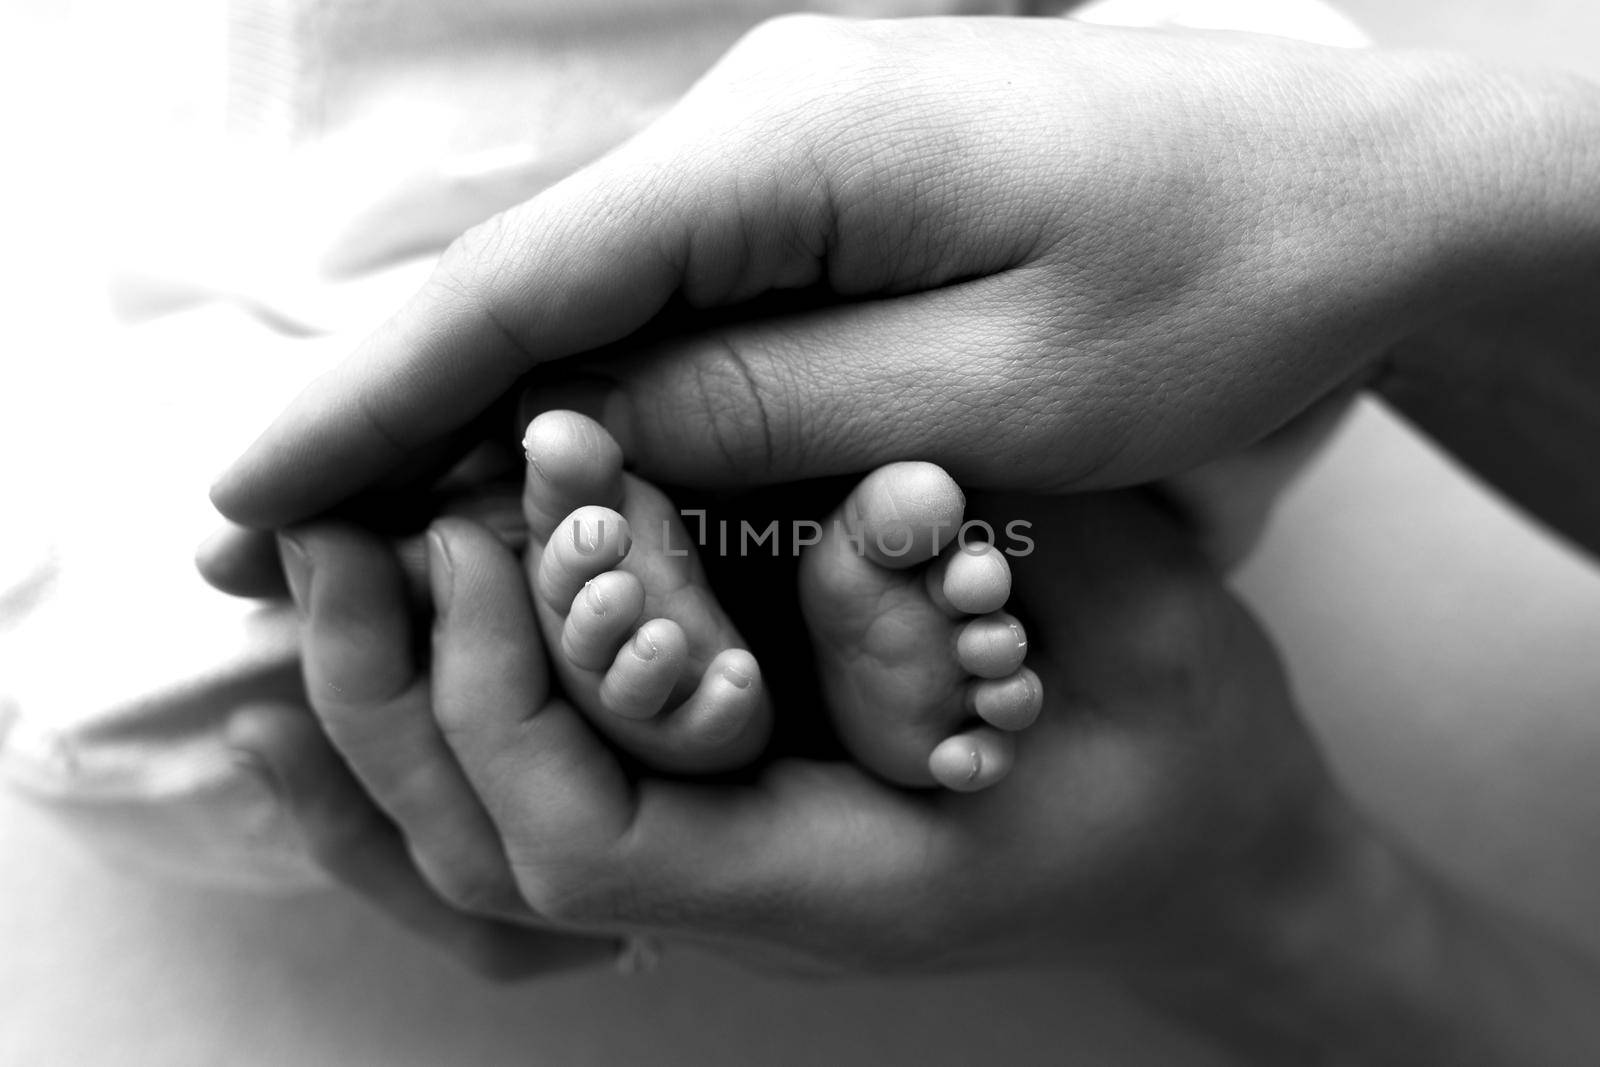 Feet of a newborn in the hands of a father, parent. Studio photography, black and white. Happy family concept. by Vad-Len